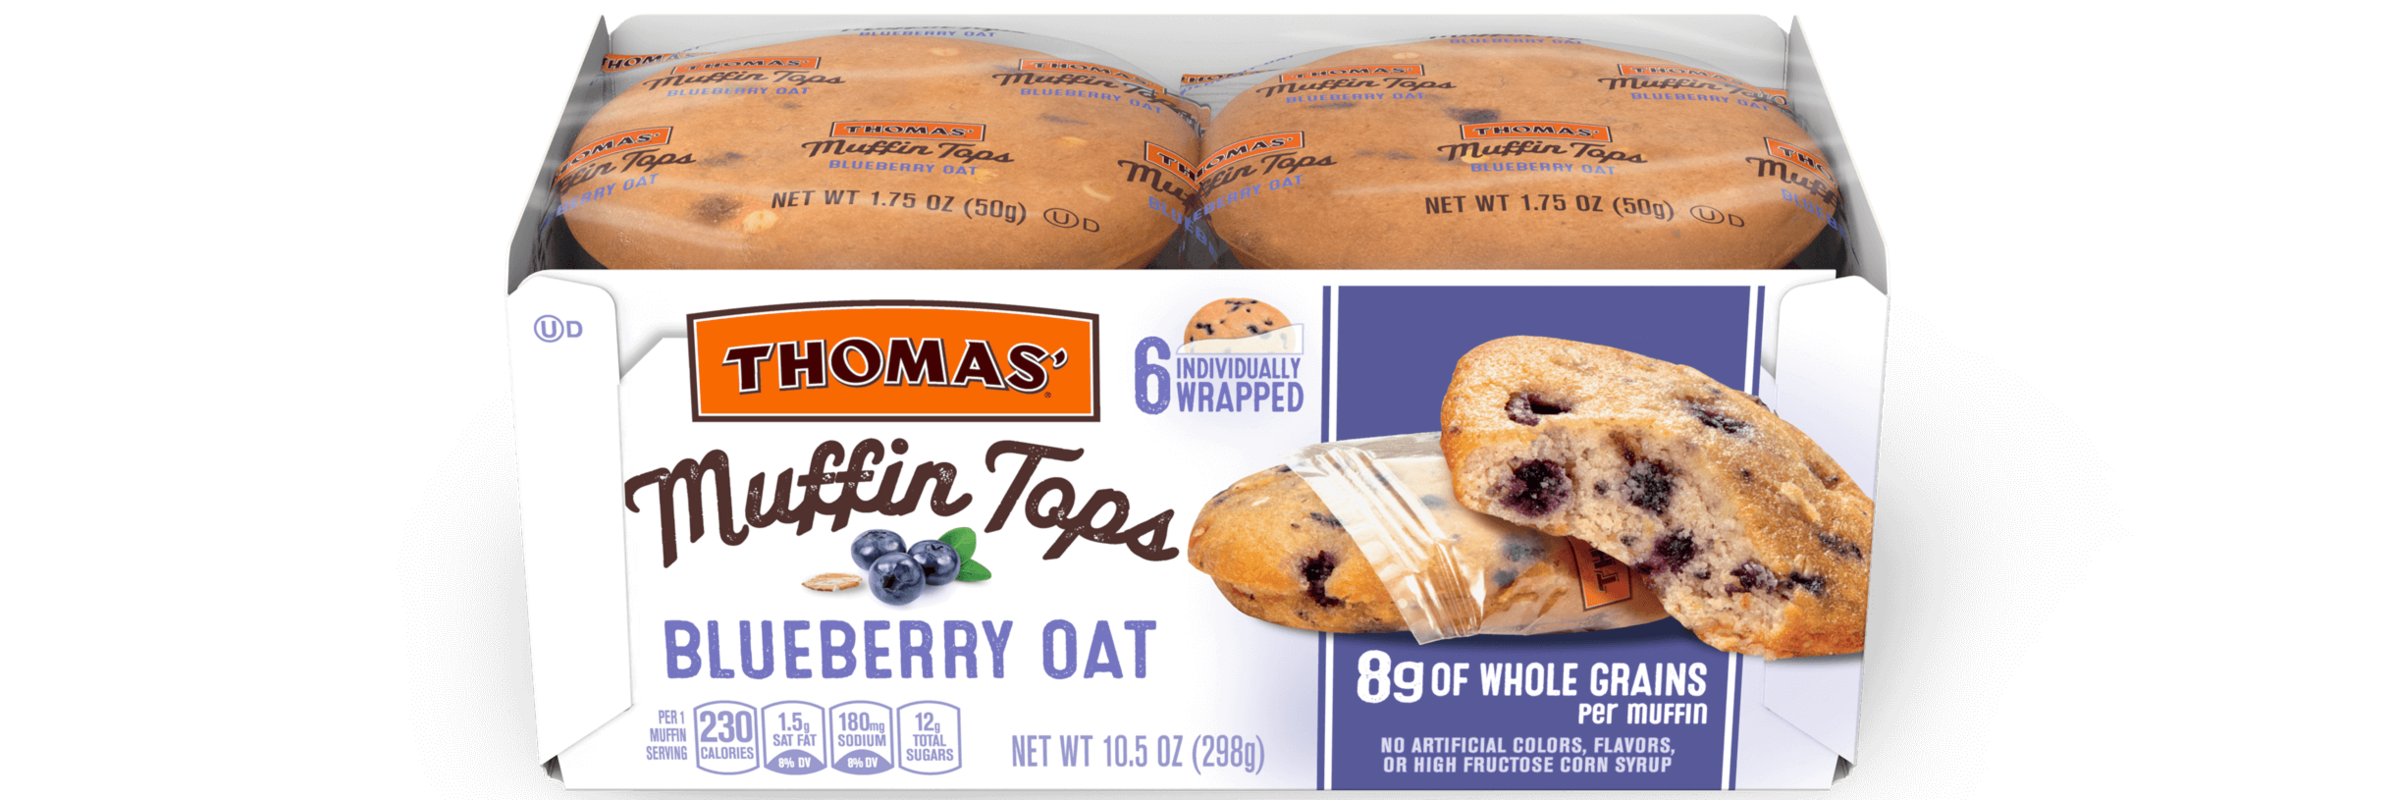 Thomas' Blueberry Oat Muffin Tops